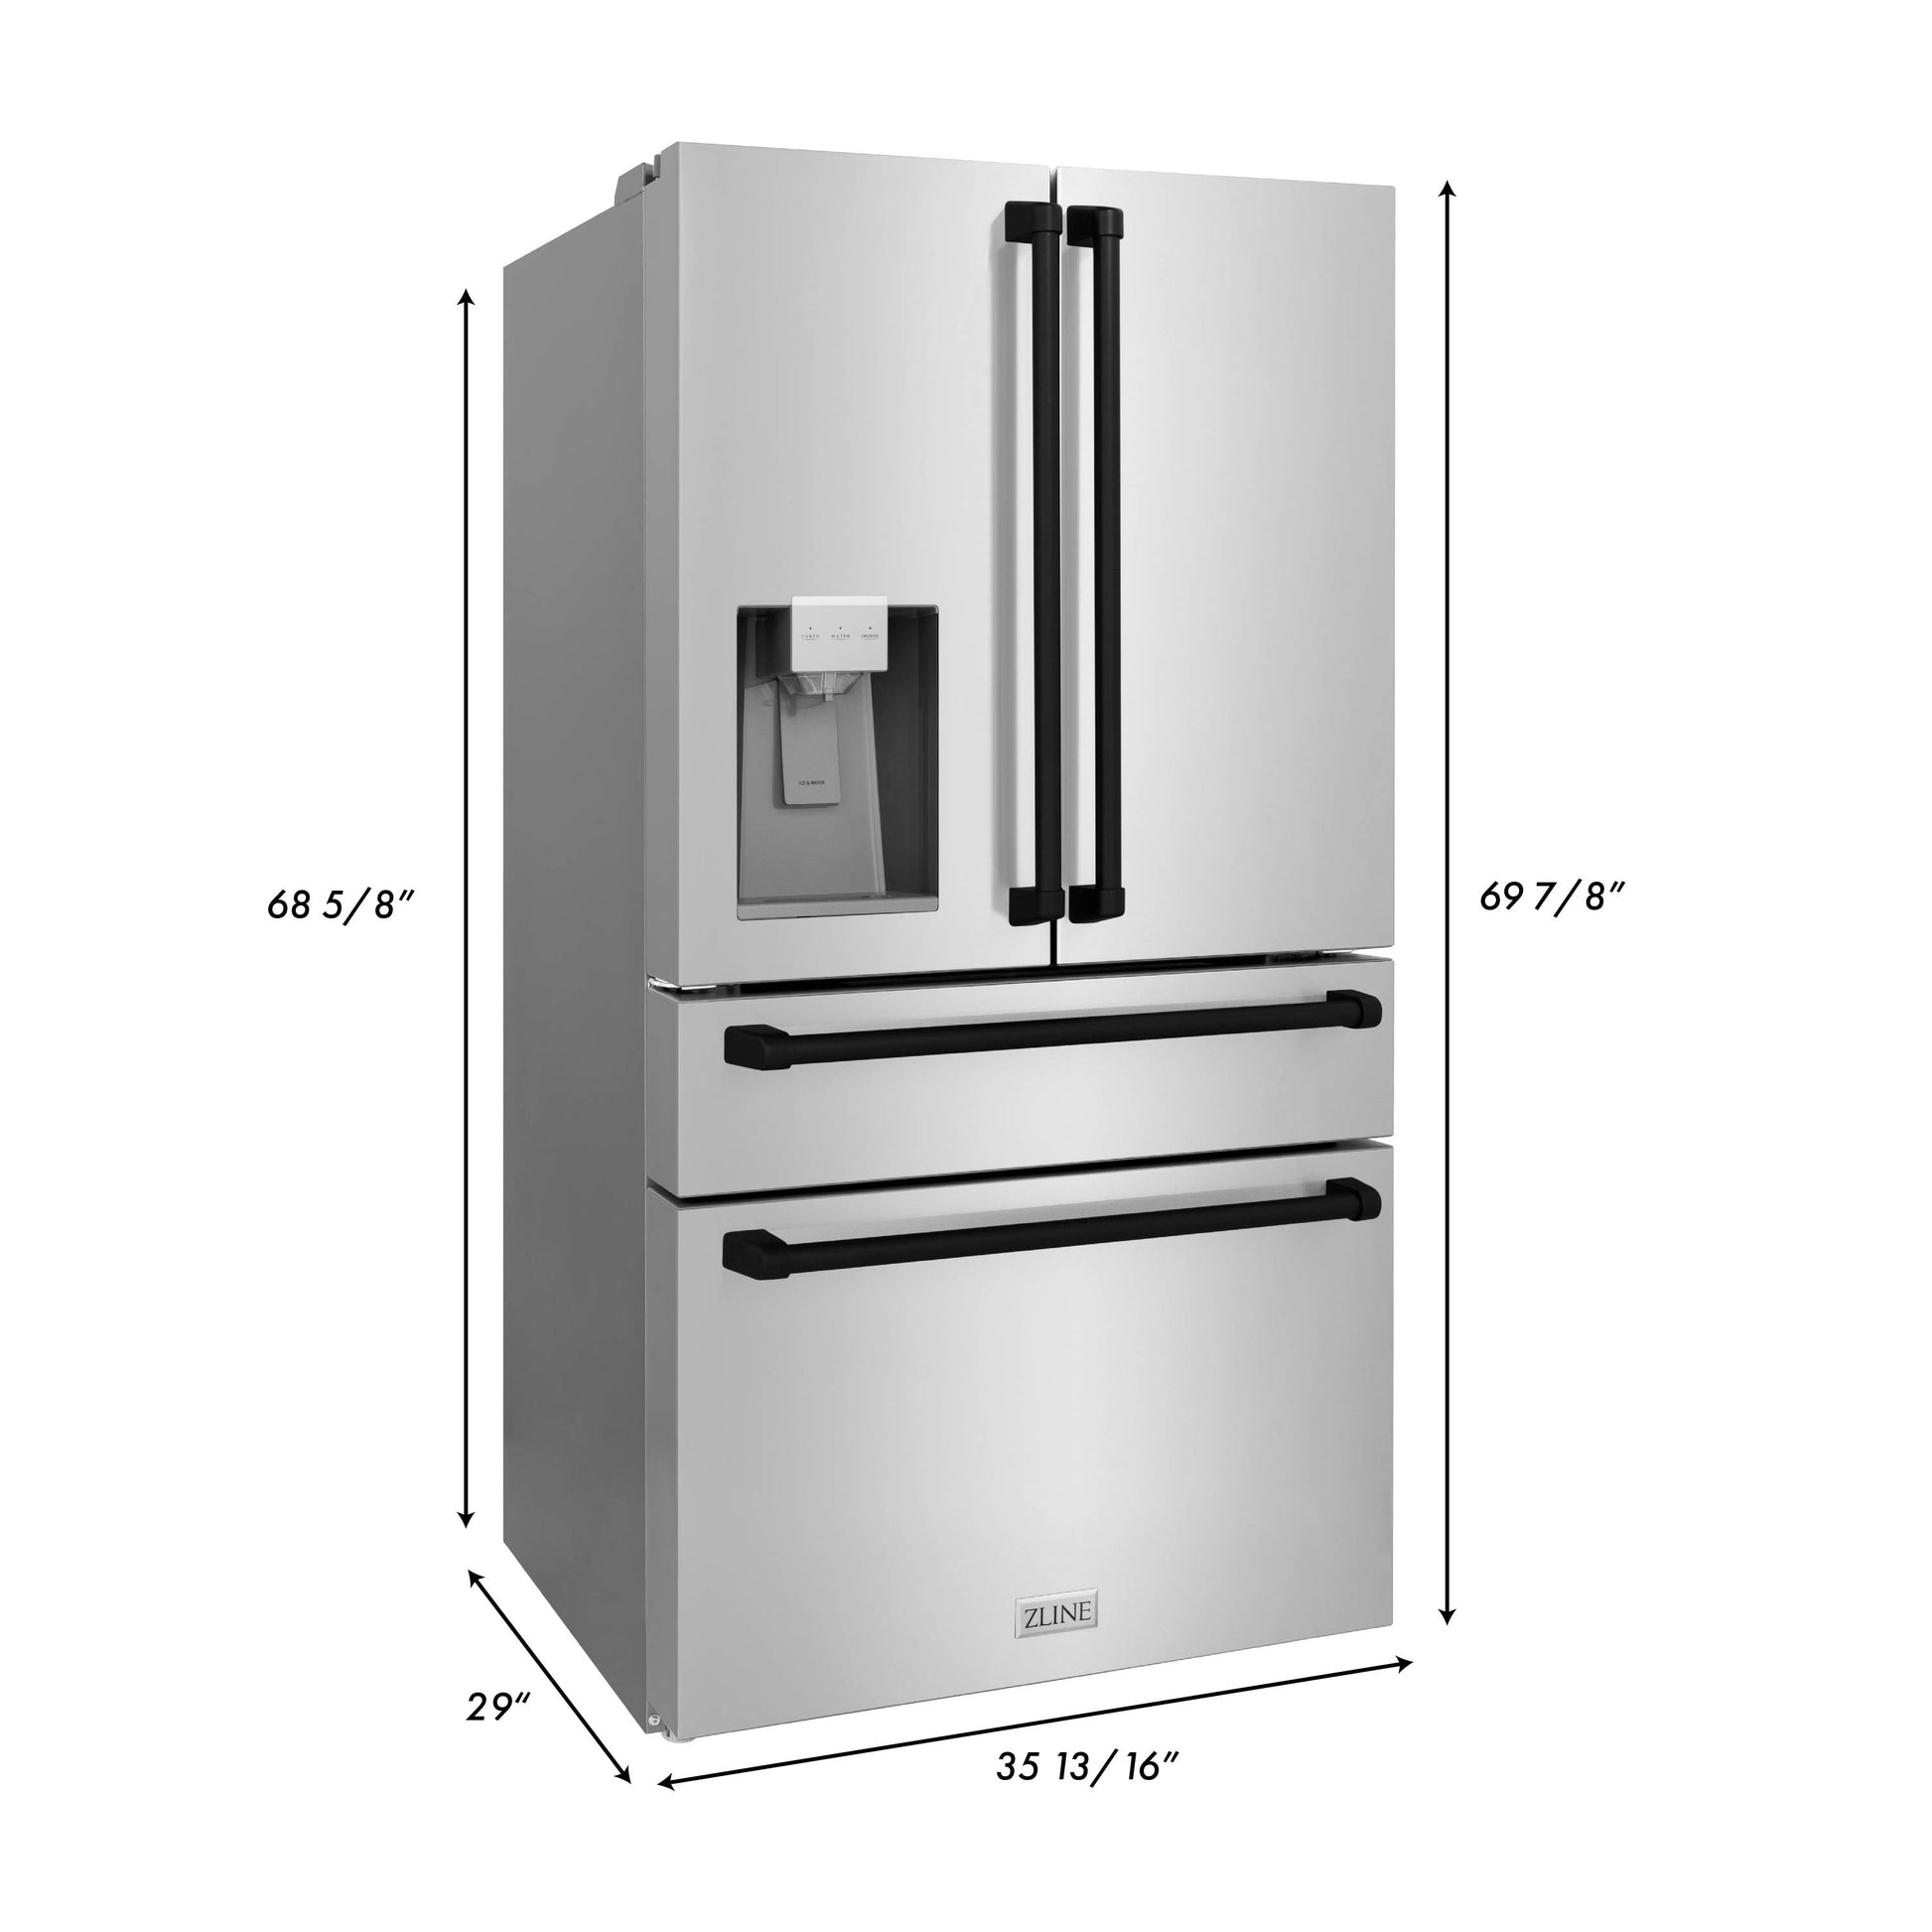 ZLINE Autograph Edition 36 in. 21.6 cu. ft Freestanding French Door Refrigerator with Water Dispenser in Stainless Steel with Matte Black Accents (RFMZ-W-36-MB) dimensional diagram with measurements.